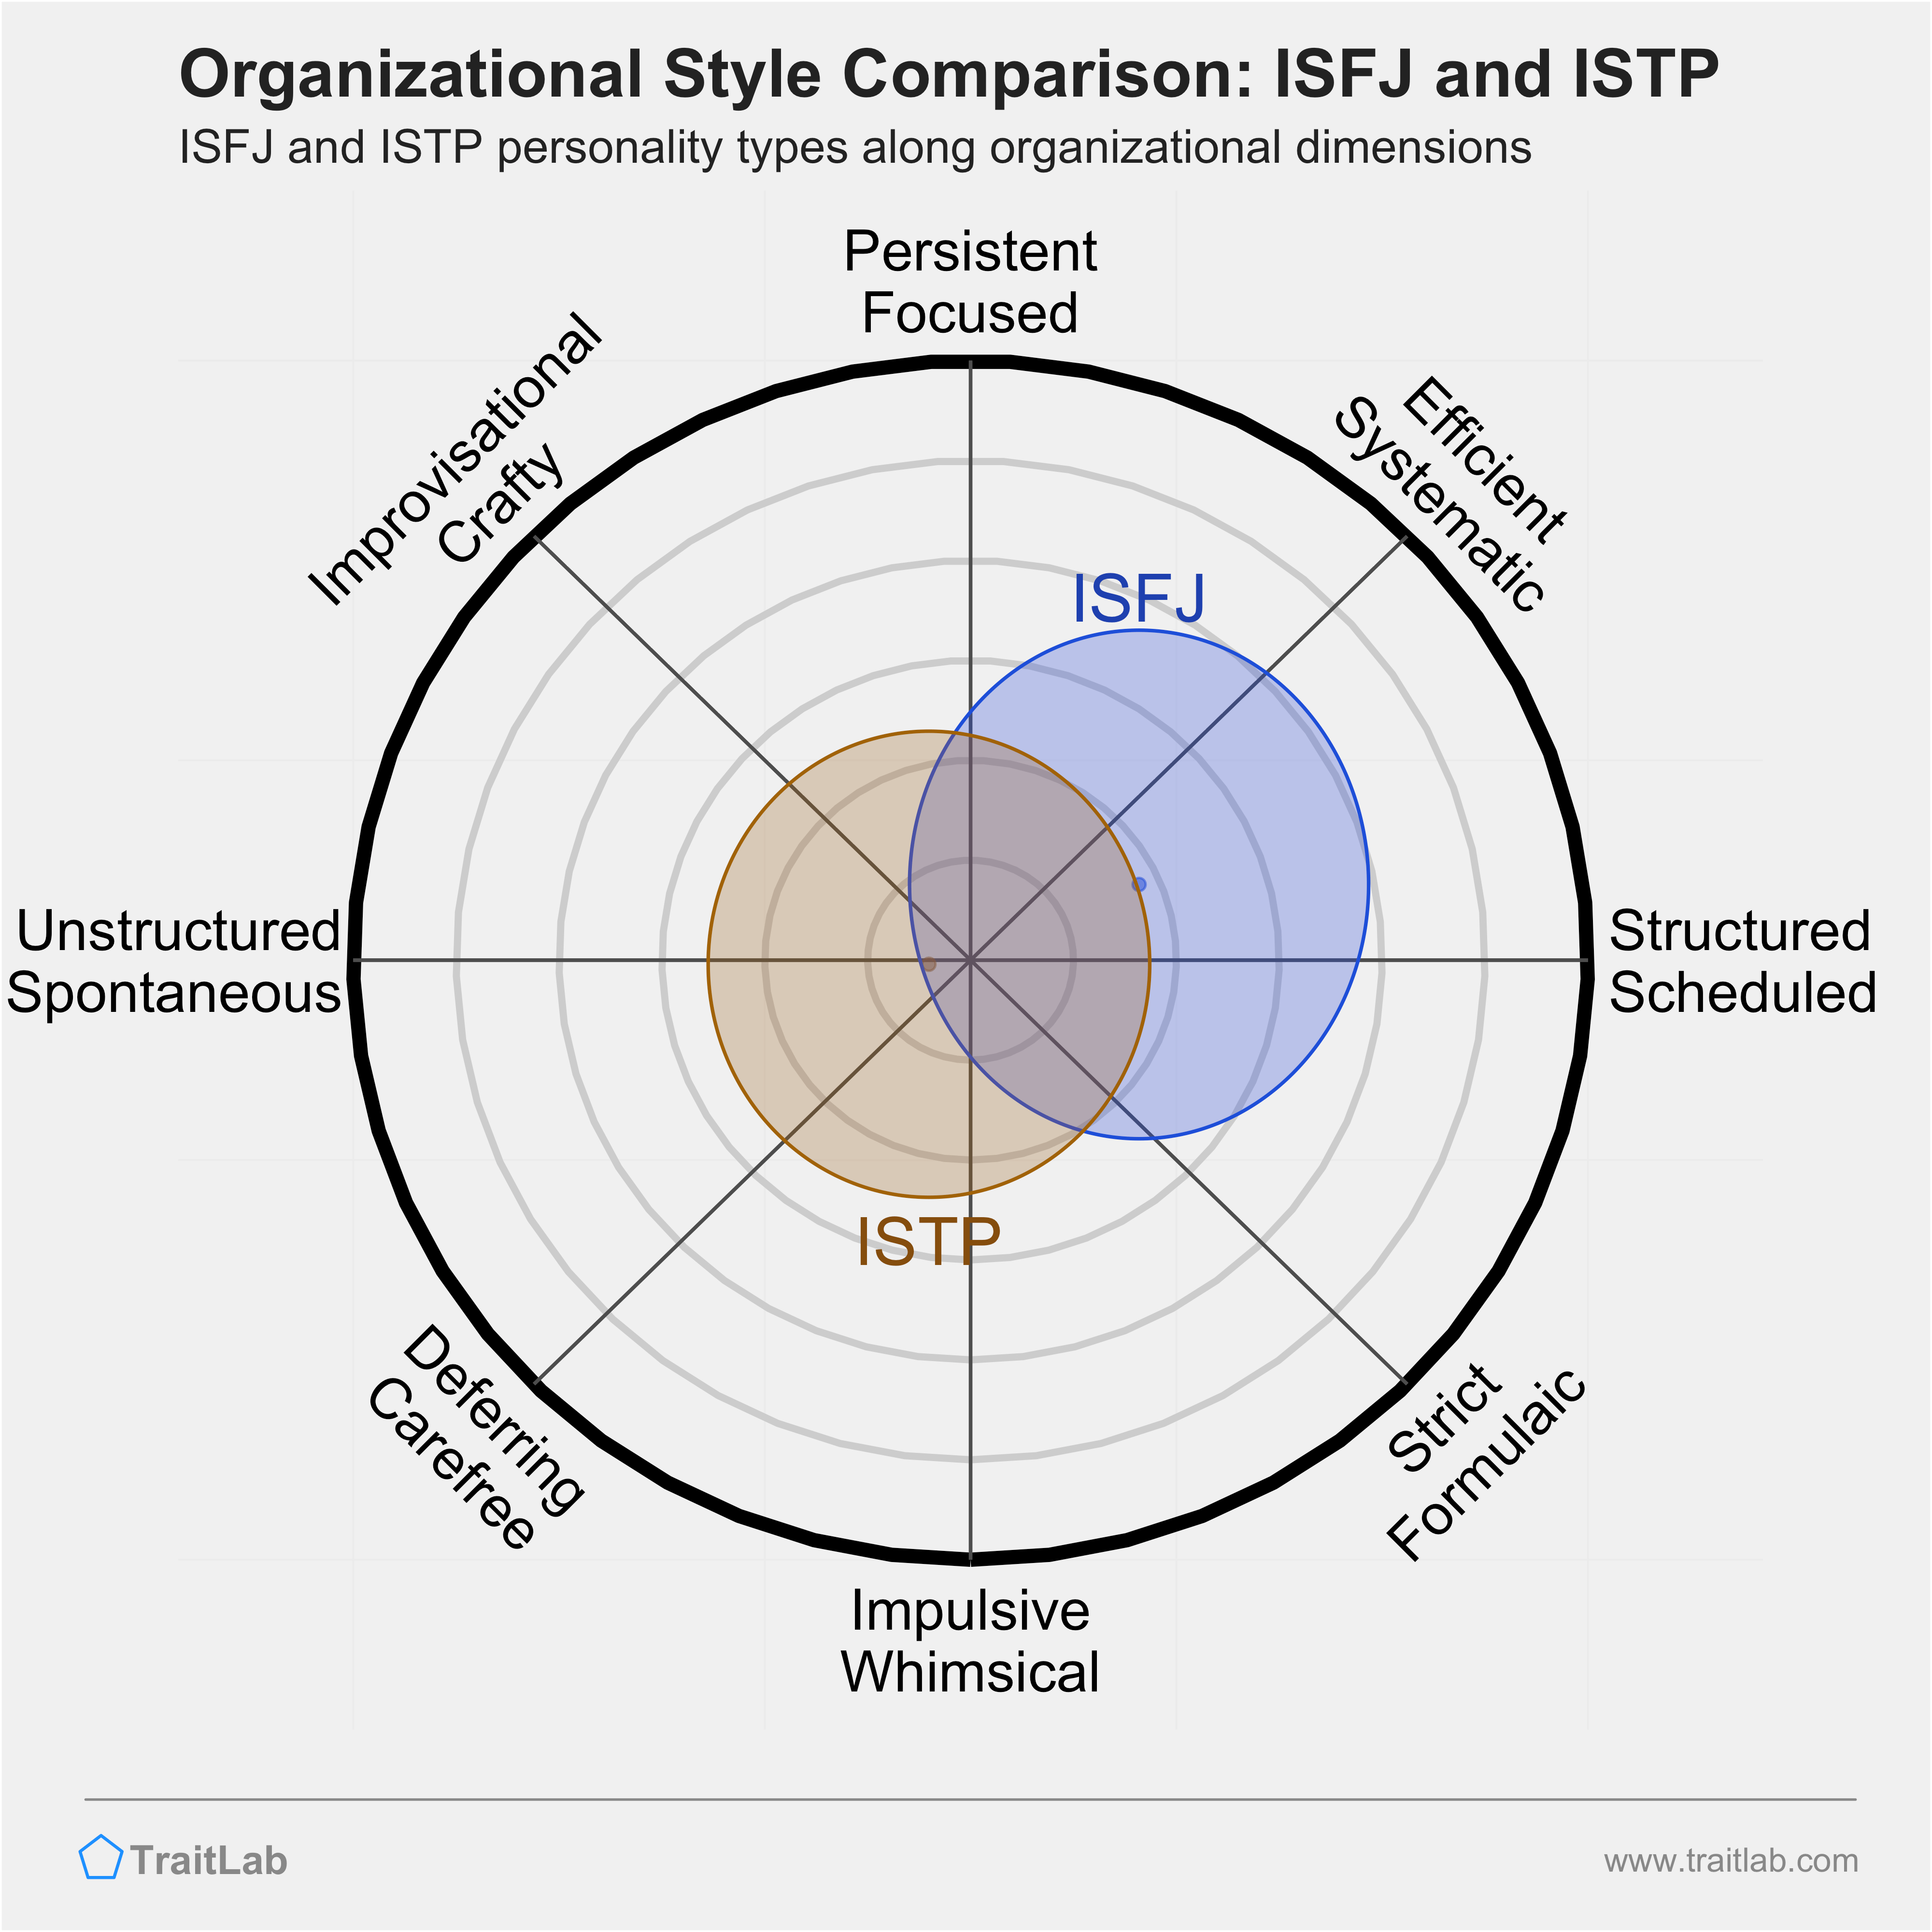 ISFJ and ISTP comparison across organizational dimensions